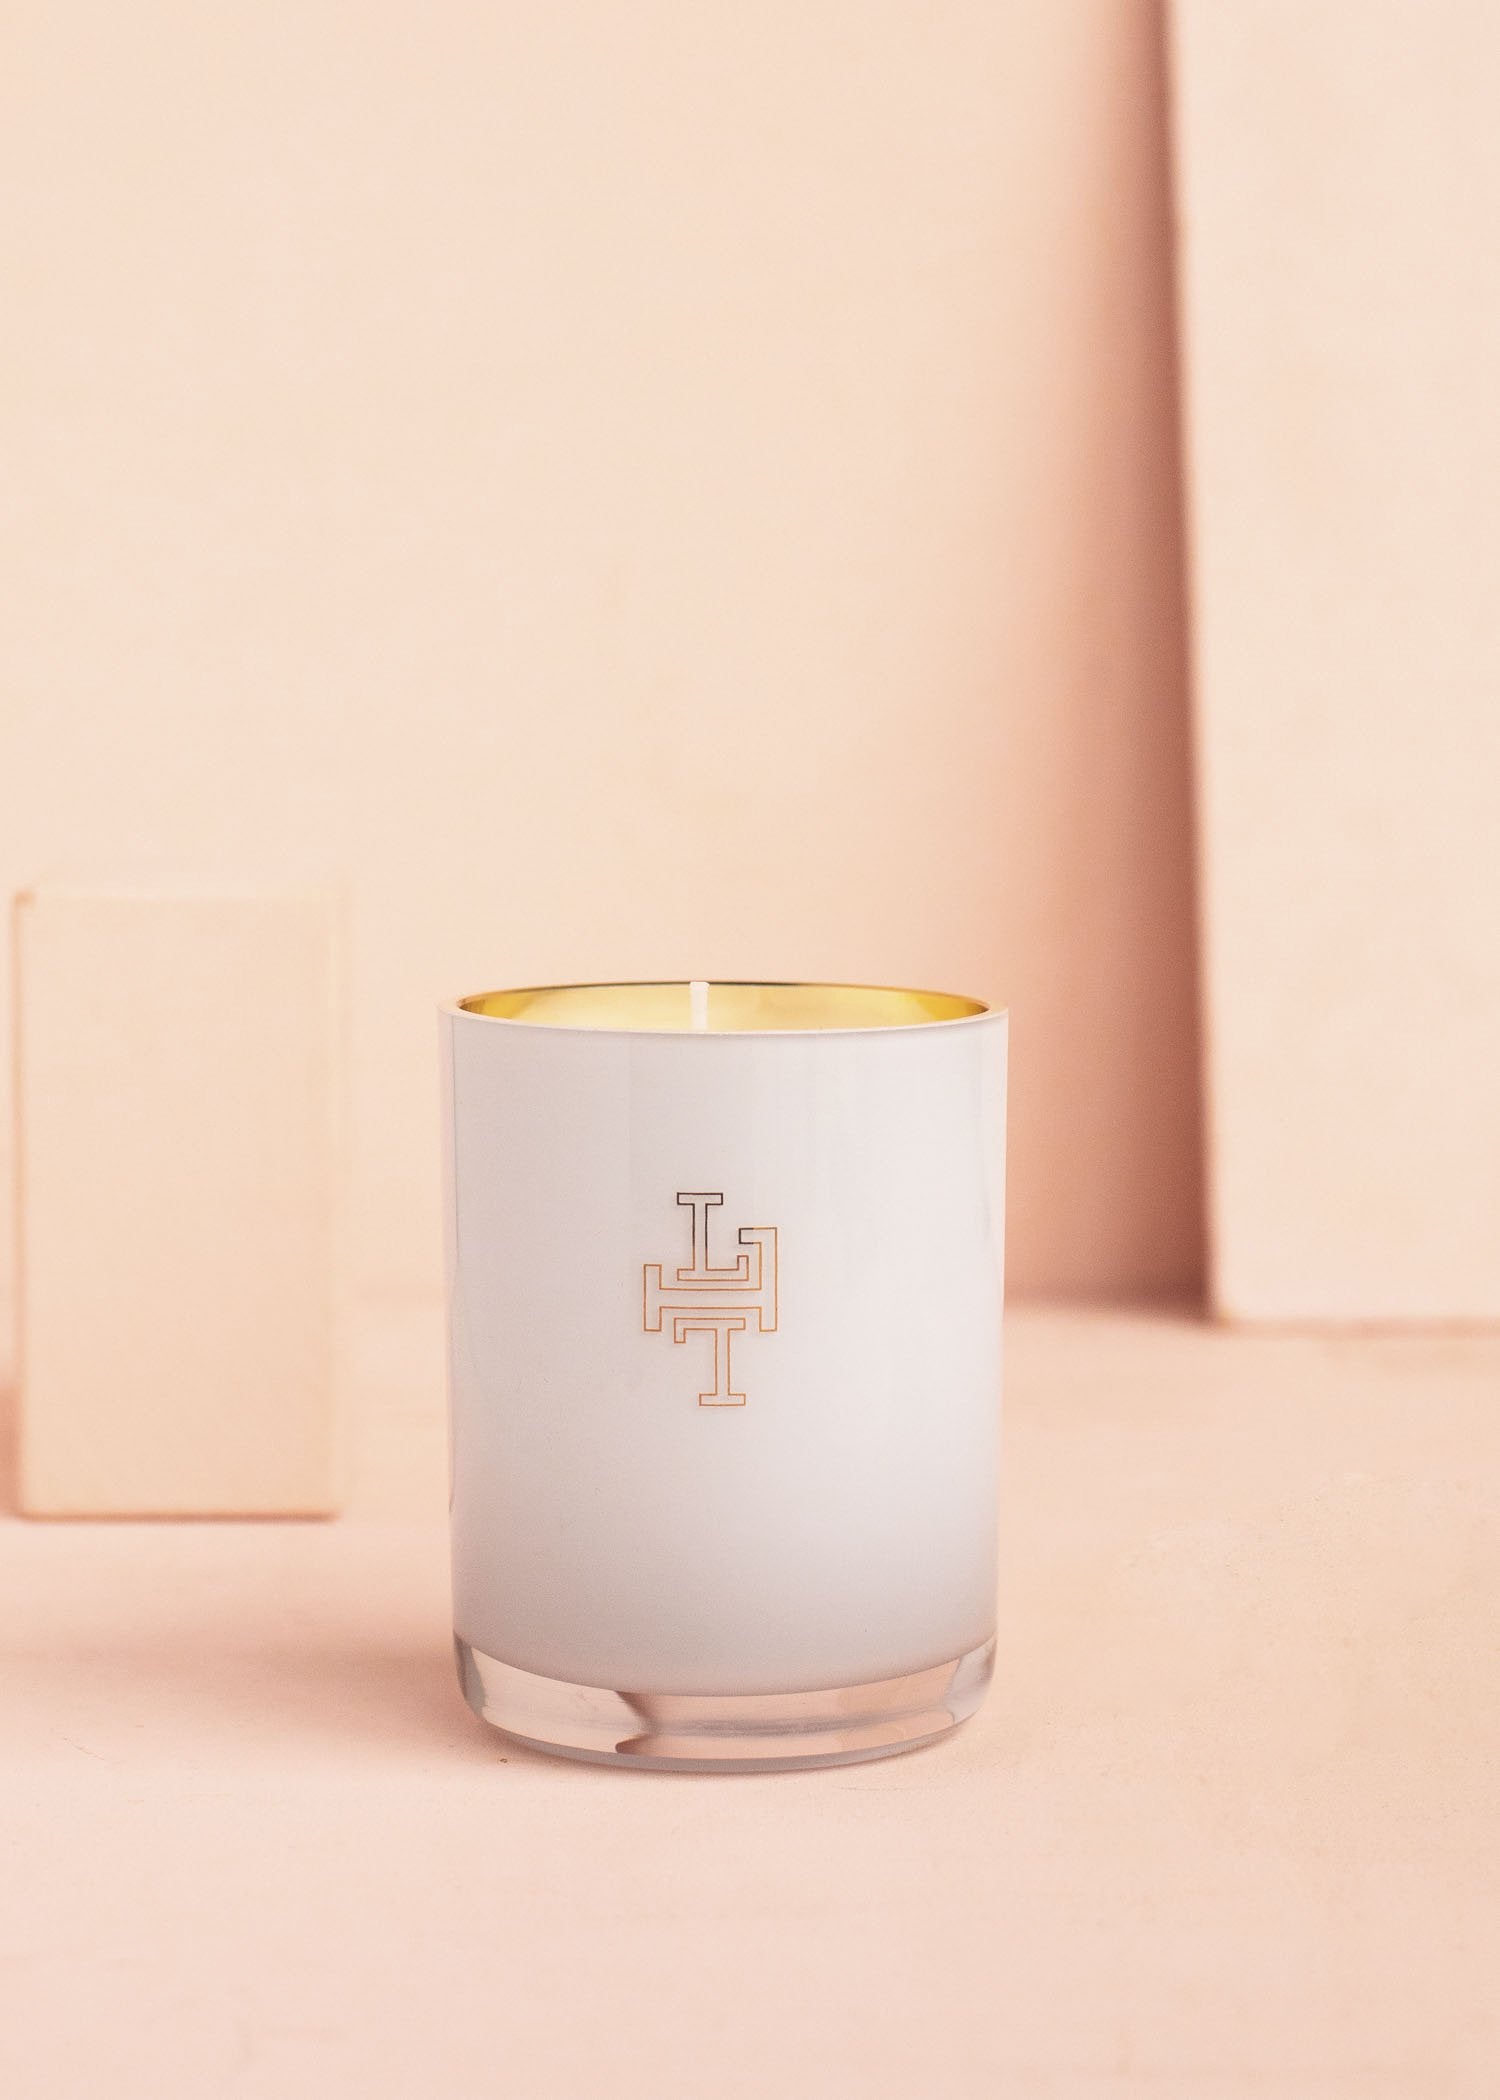 Lollia "This Moment" Candle